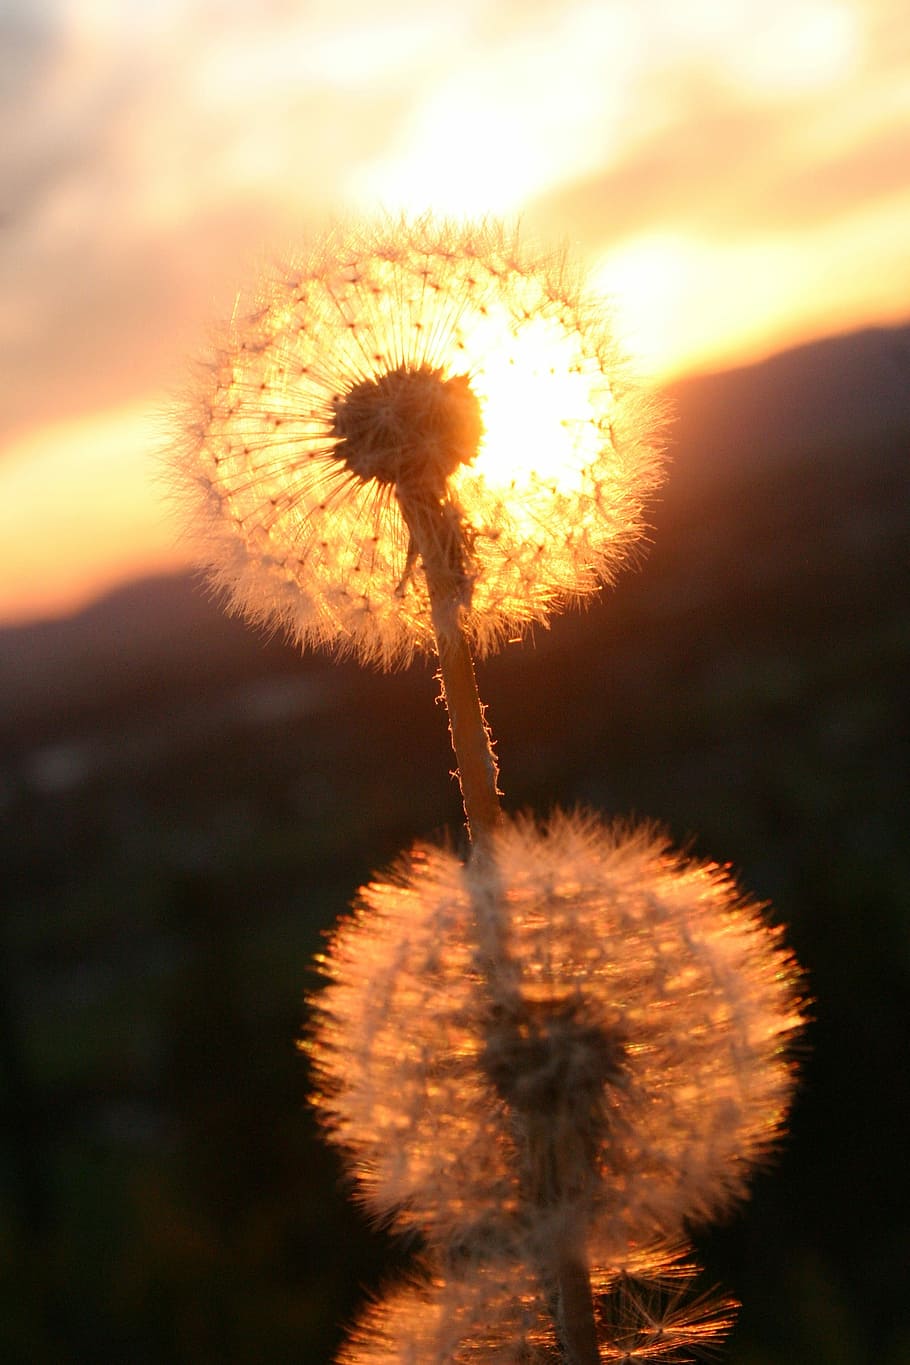 Dandelion, Flower, Weed, sunset, nature, plant, uncultivated